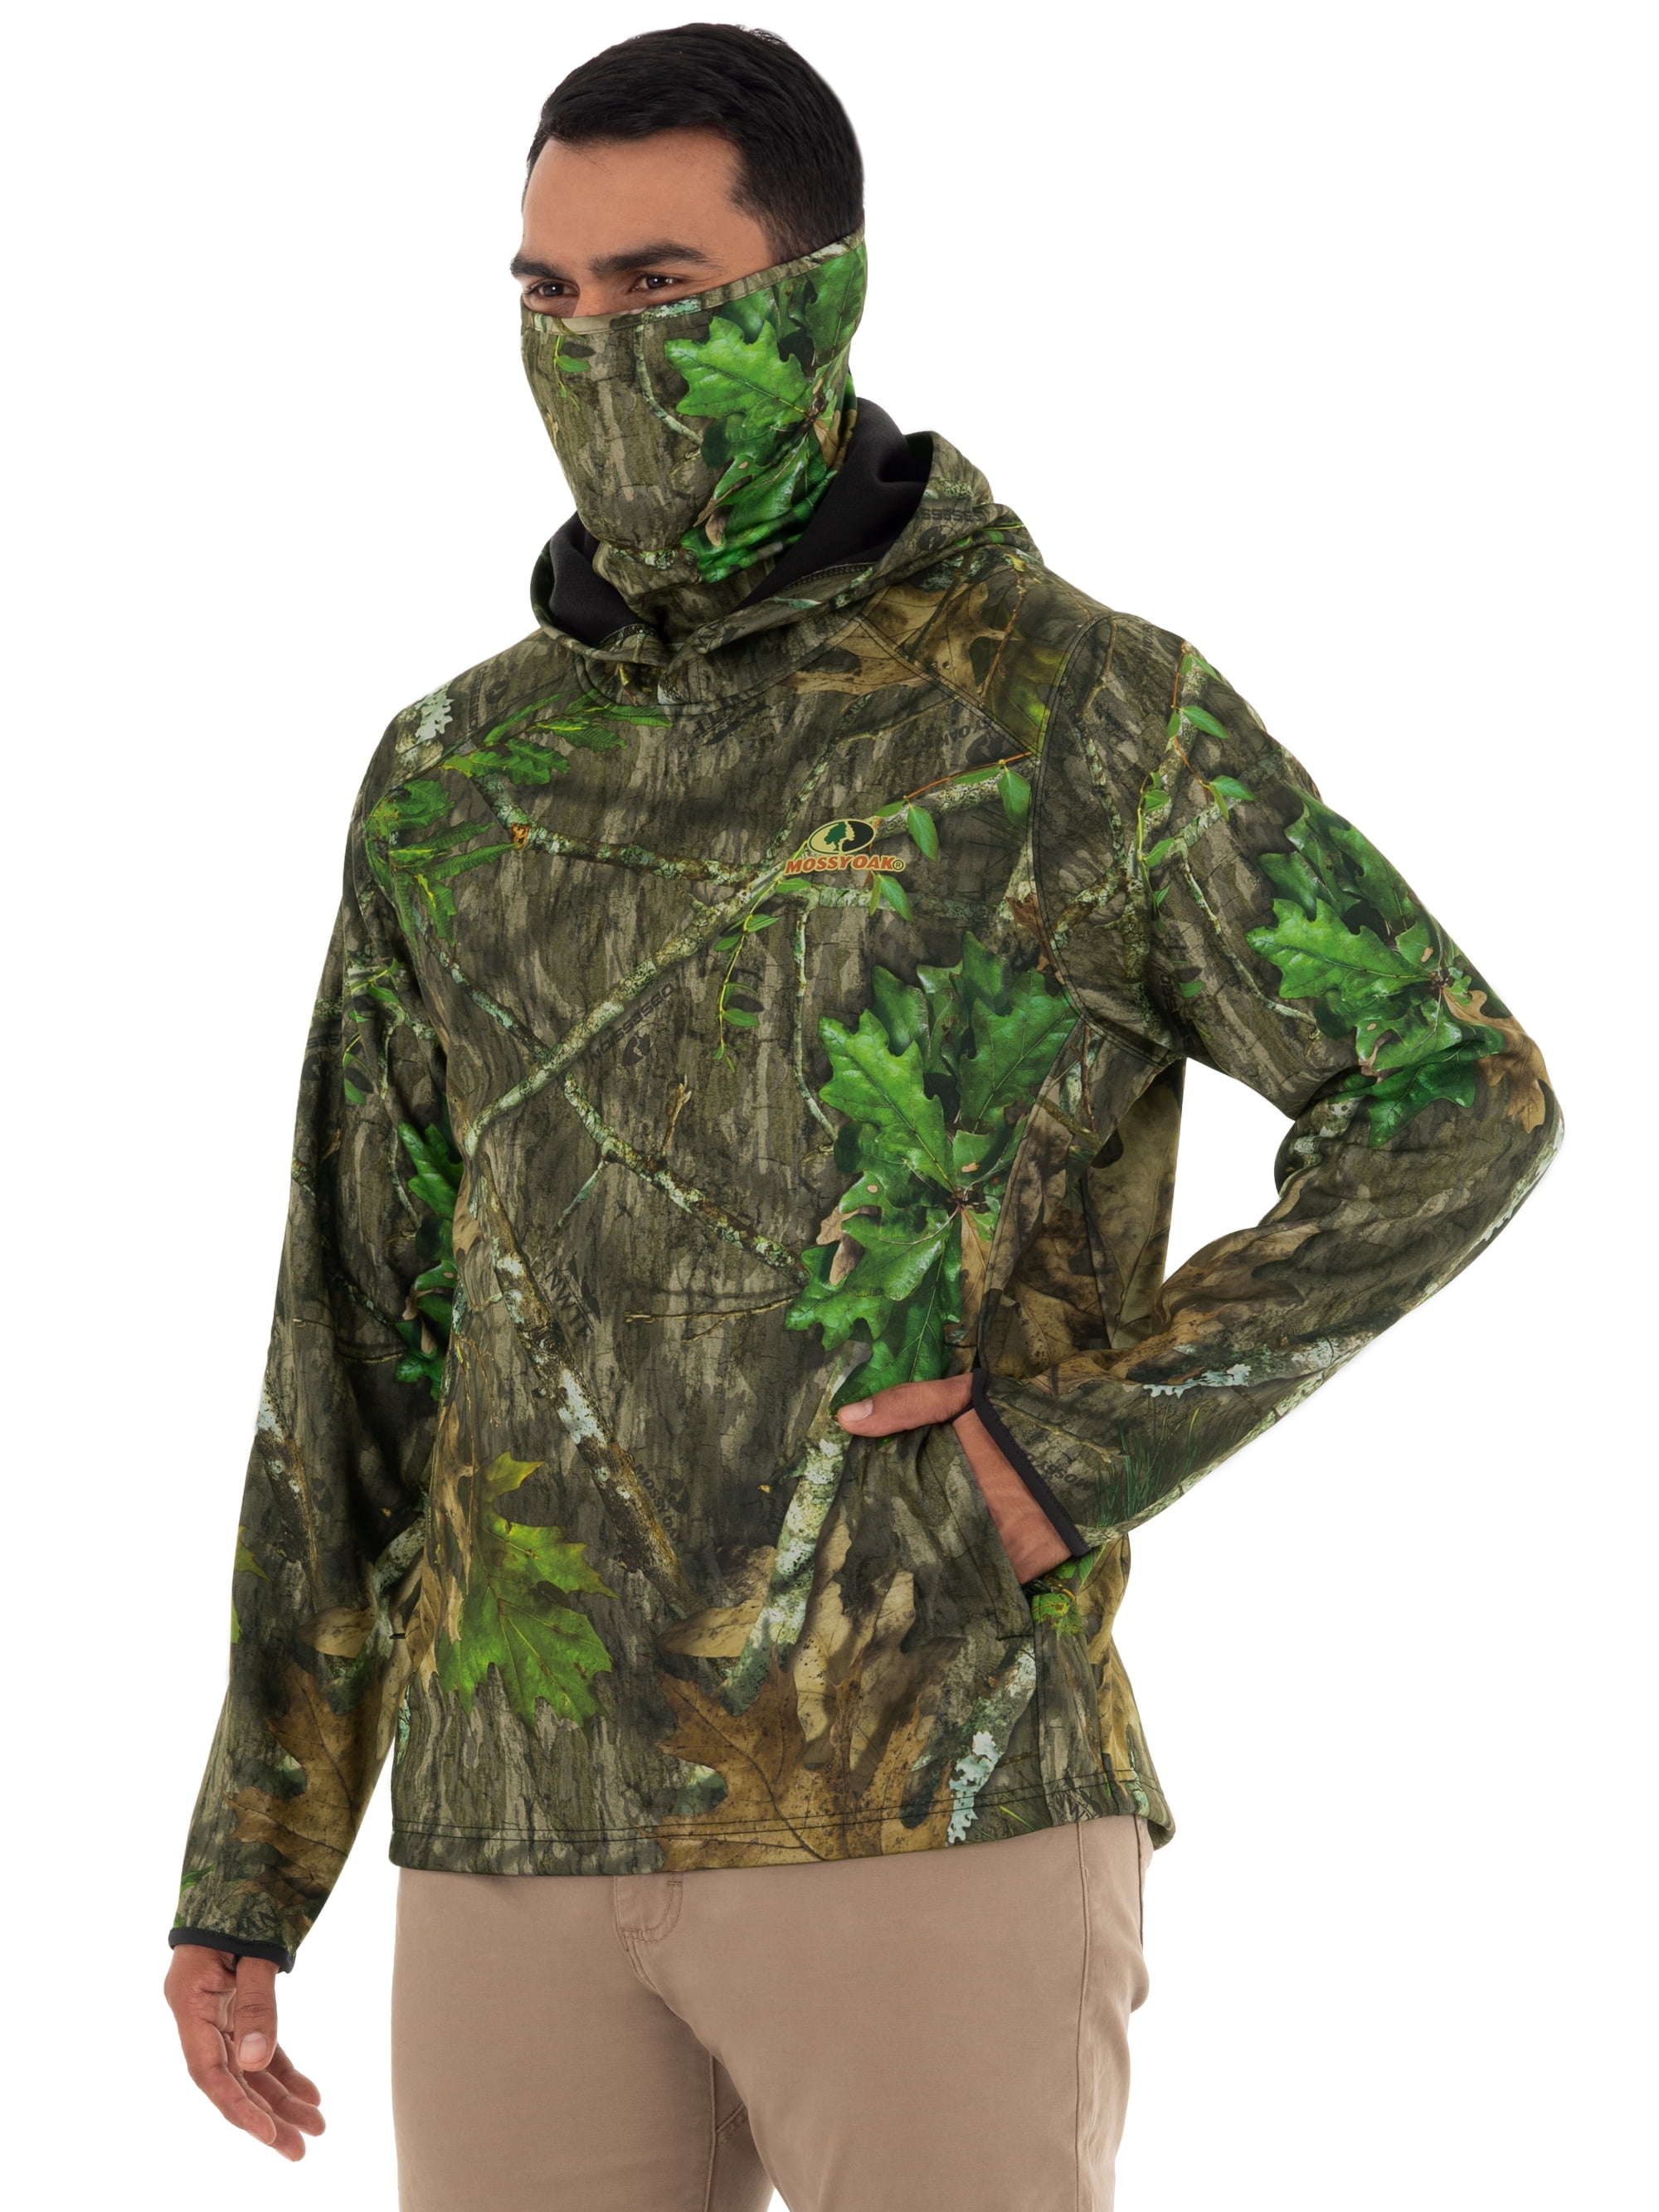 Mossy Oak Men's Turkey Hunting Camo Hoodie with Built in Neck Gaiter, Size: XL, Multicolor